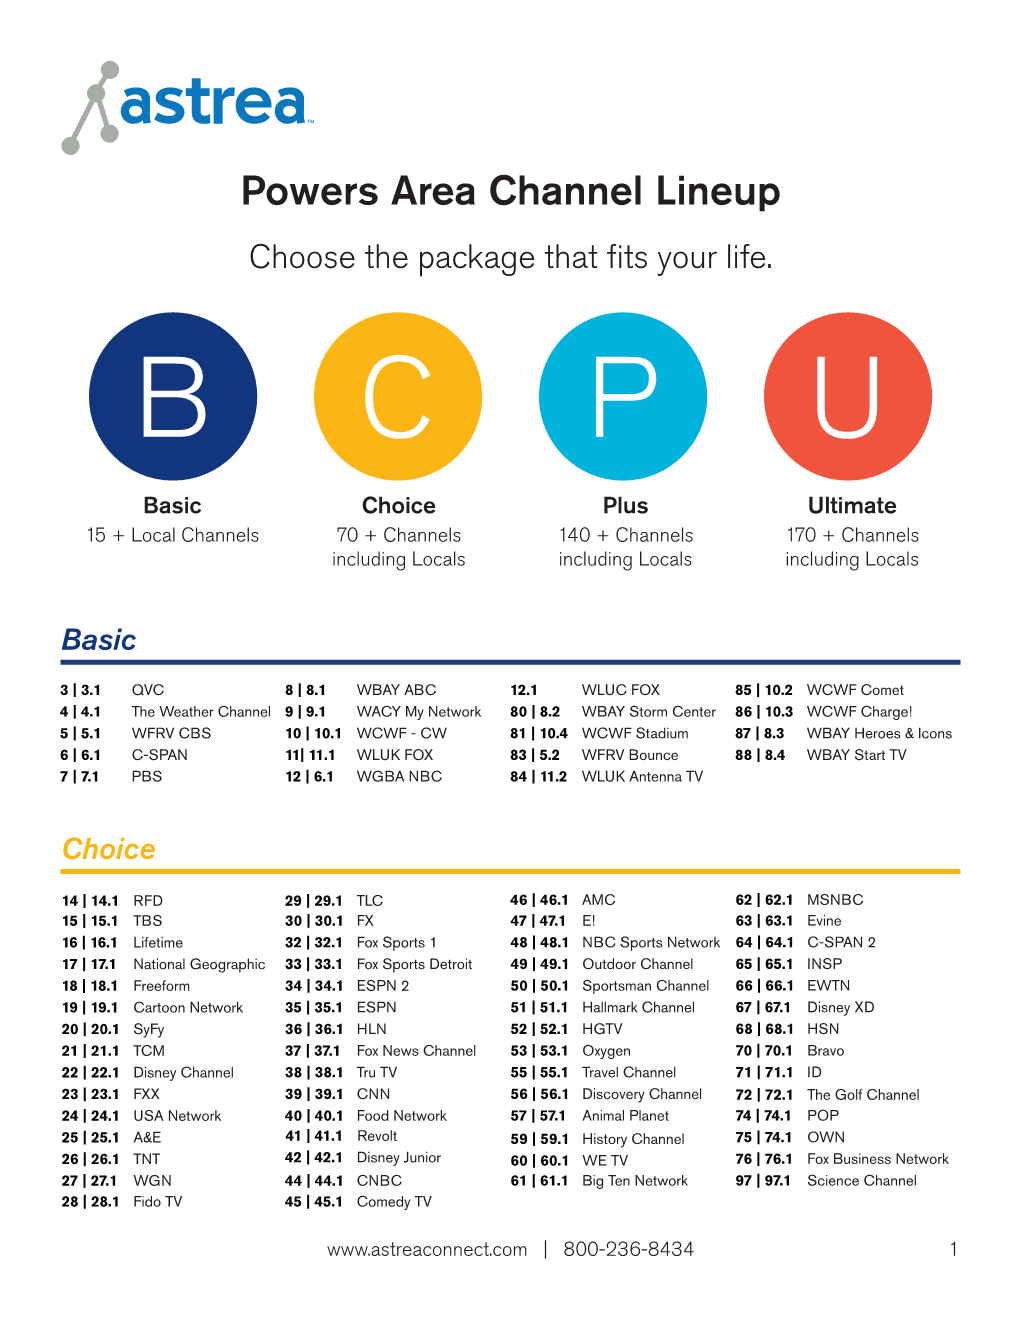 Powers Area Channel Lineup Choose the Package That ﬁts Your Life